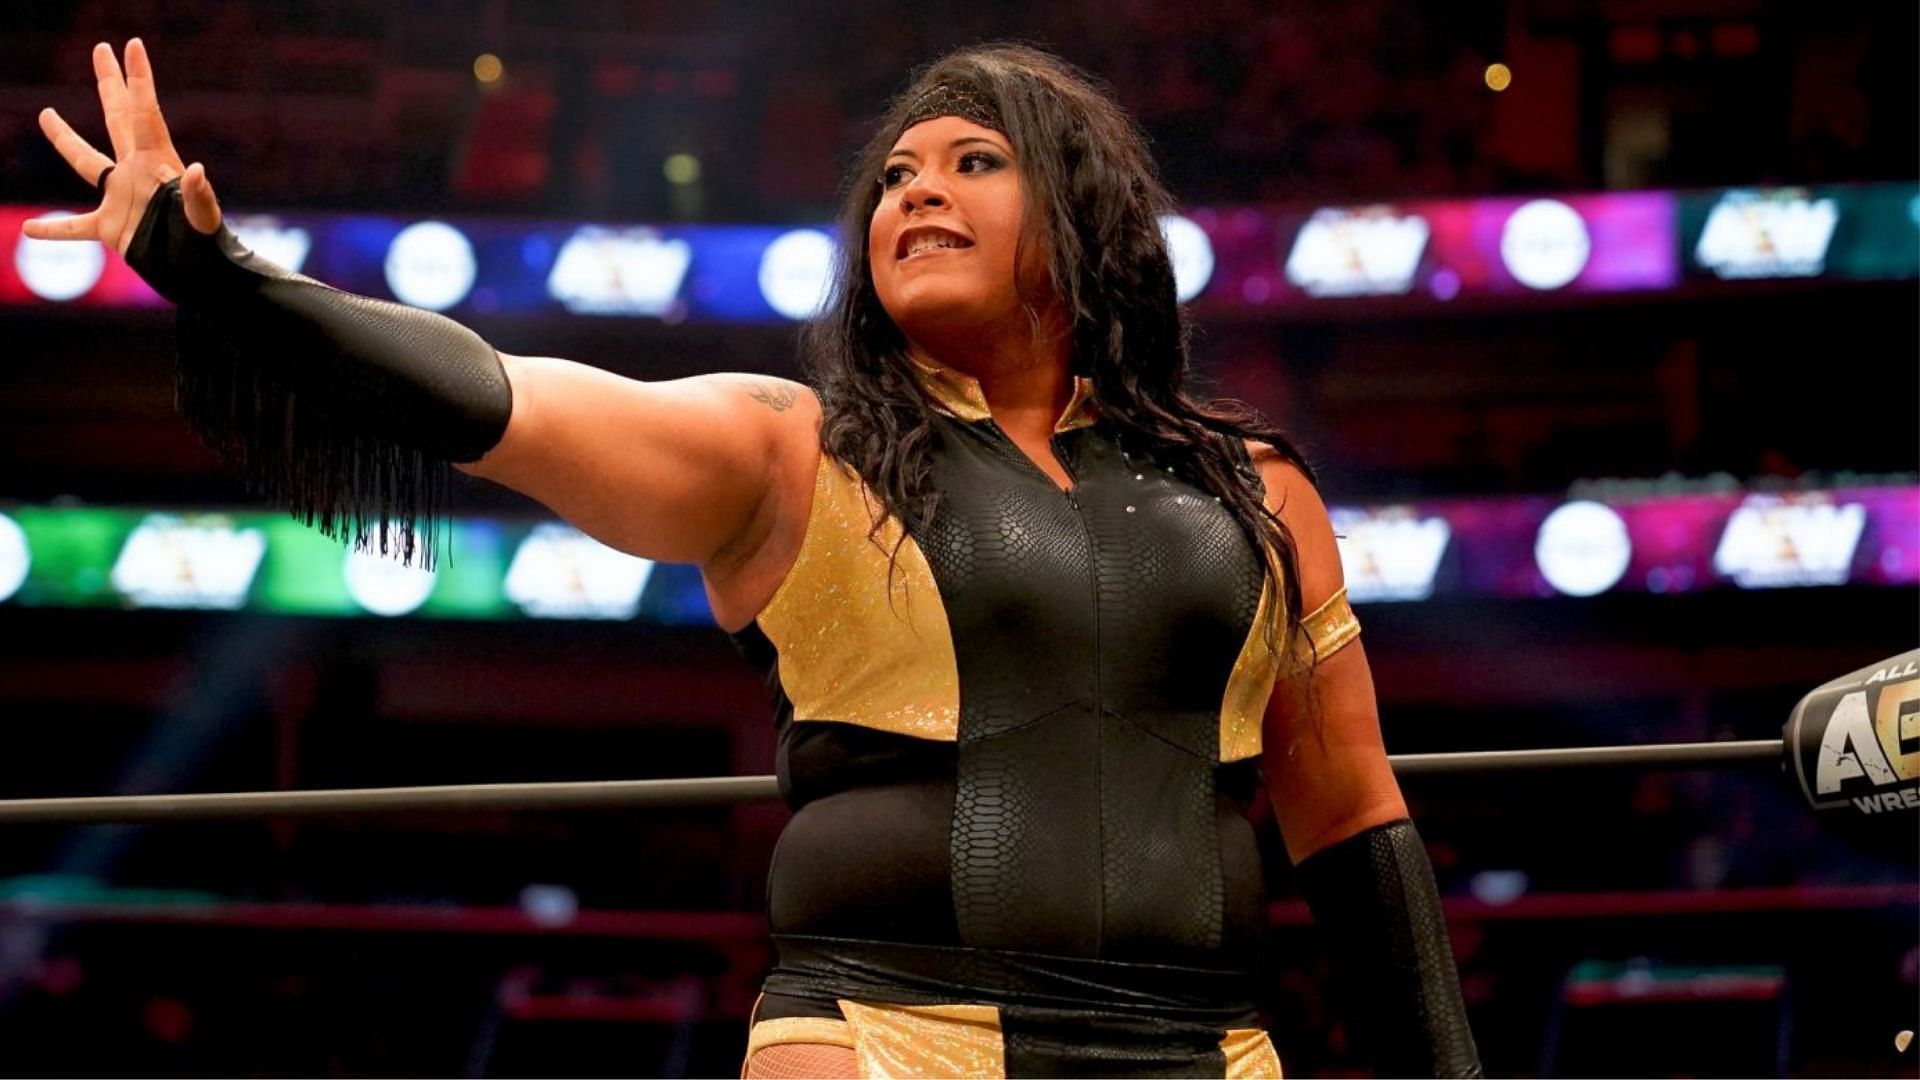 Nyla Rose at an AEW Dynamite event